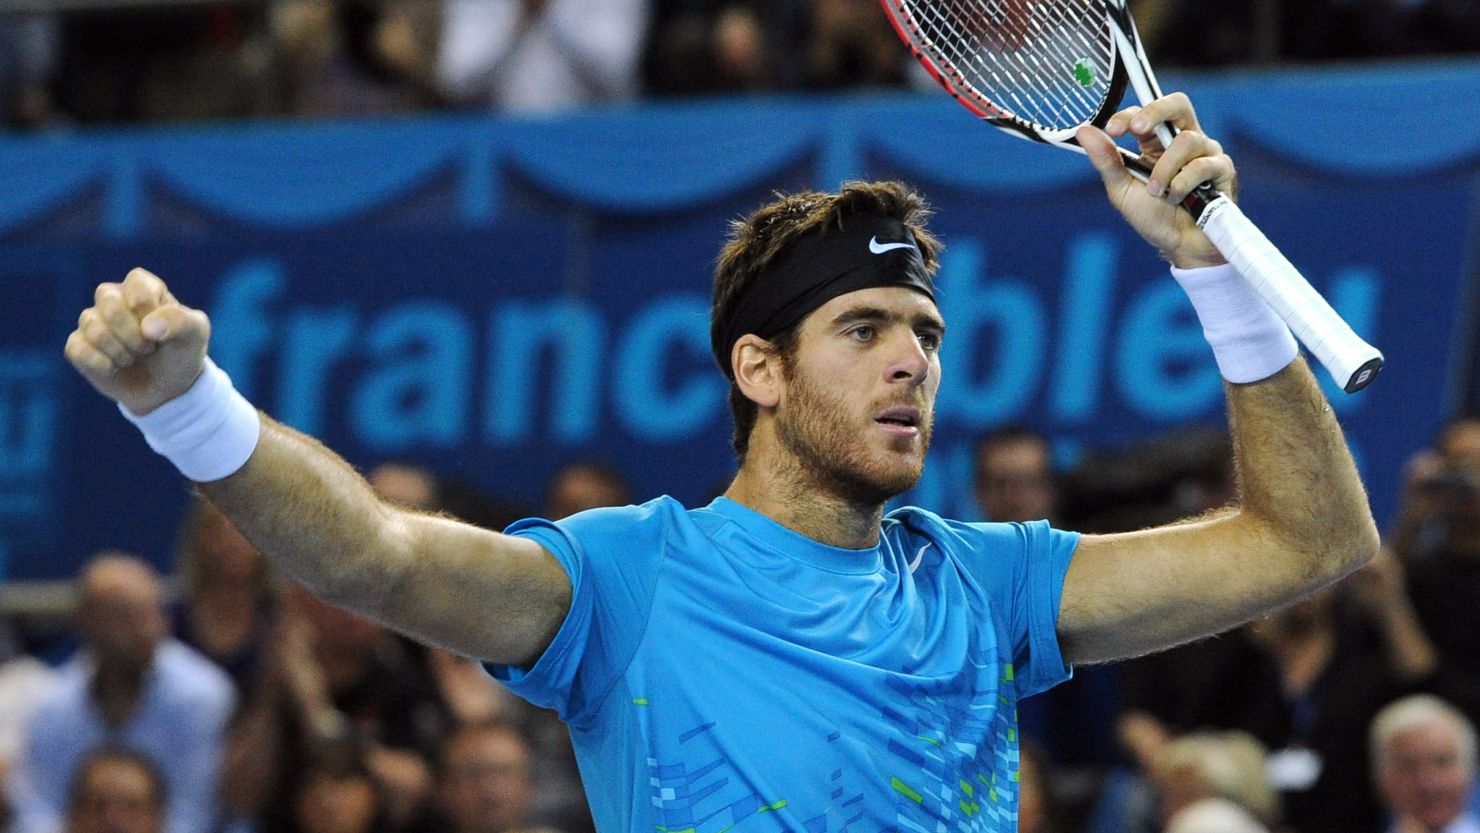 Juan Martin del Potro's straight sets victory in Marseille saw him collect his 10th career title.